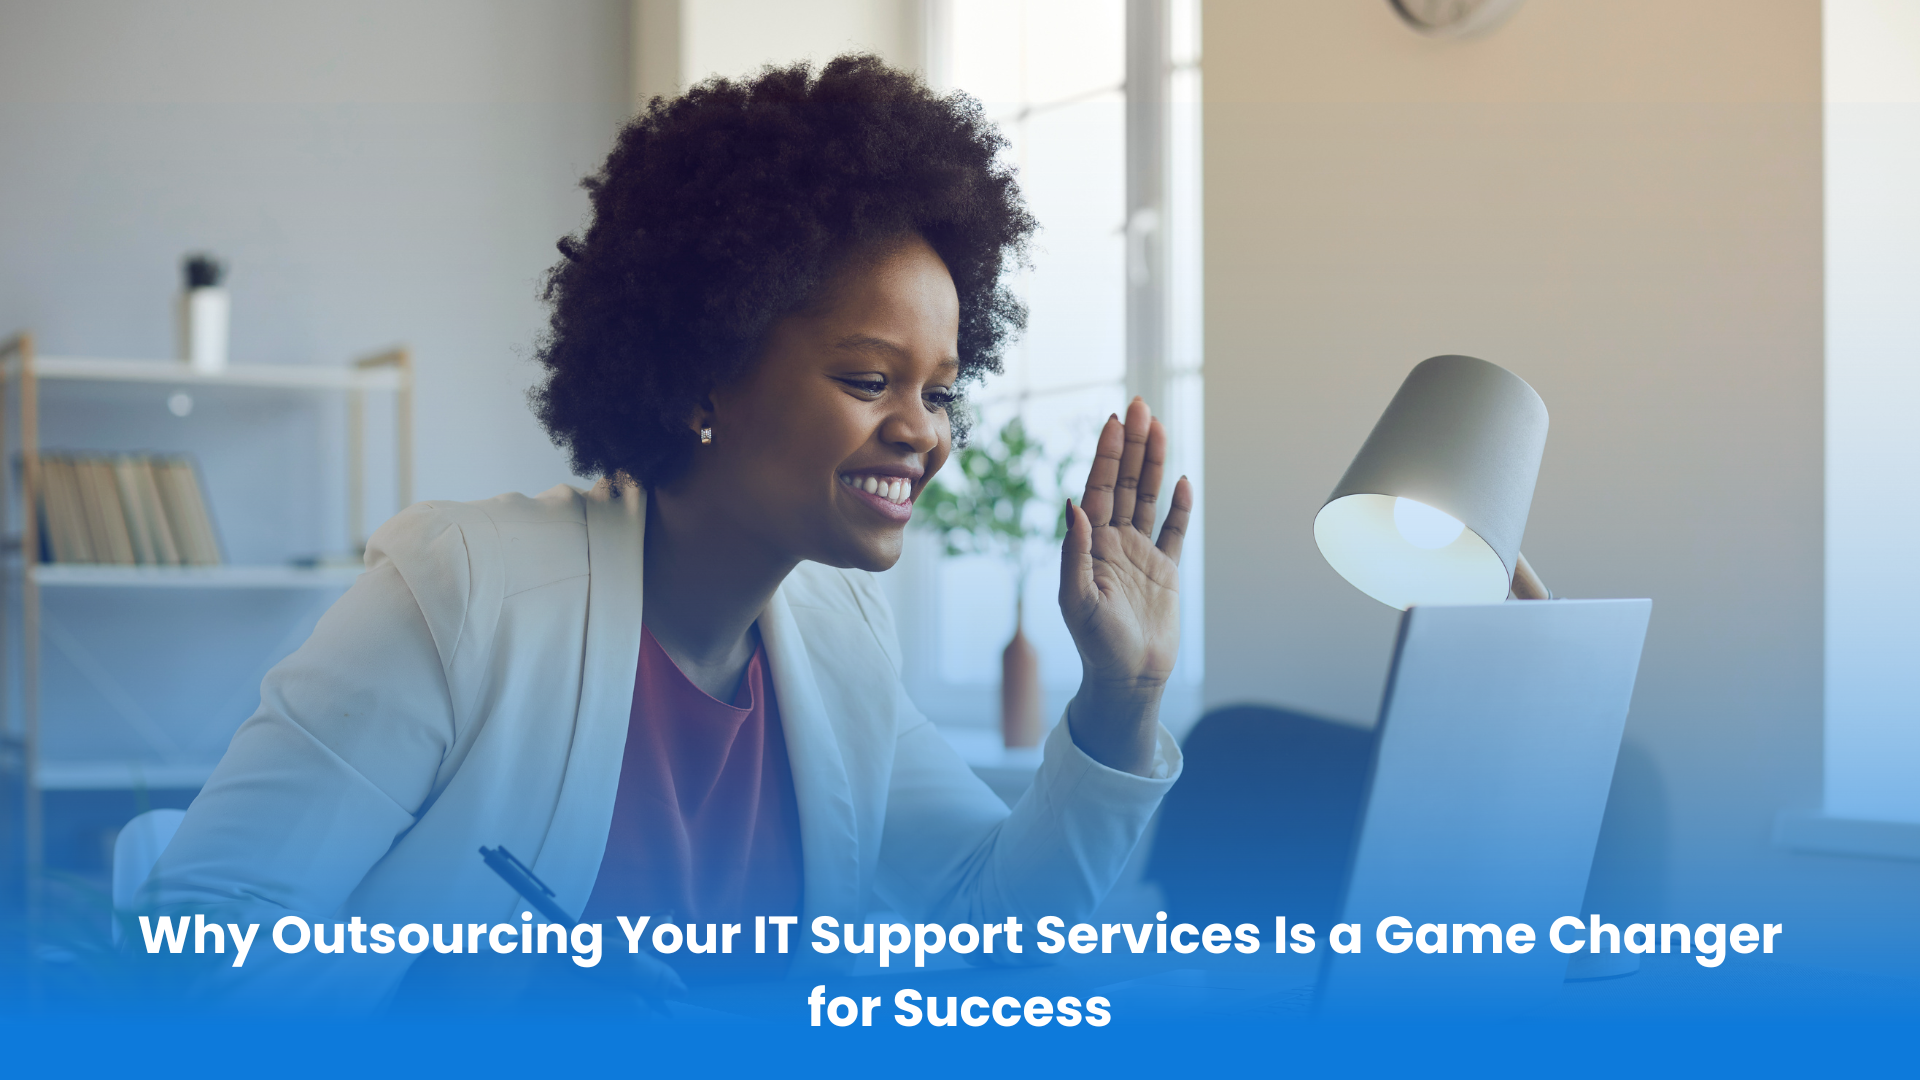 Why Outsourcing Your IT Support Services Is a Game Changer for Success